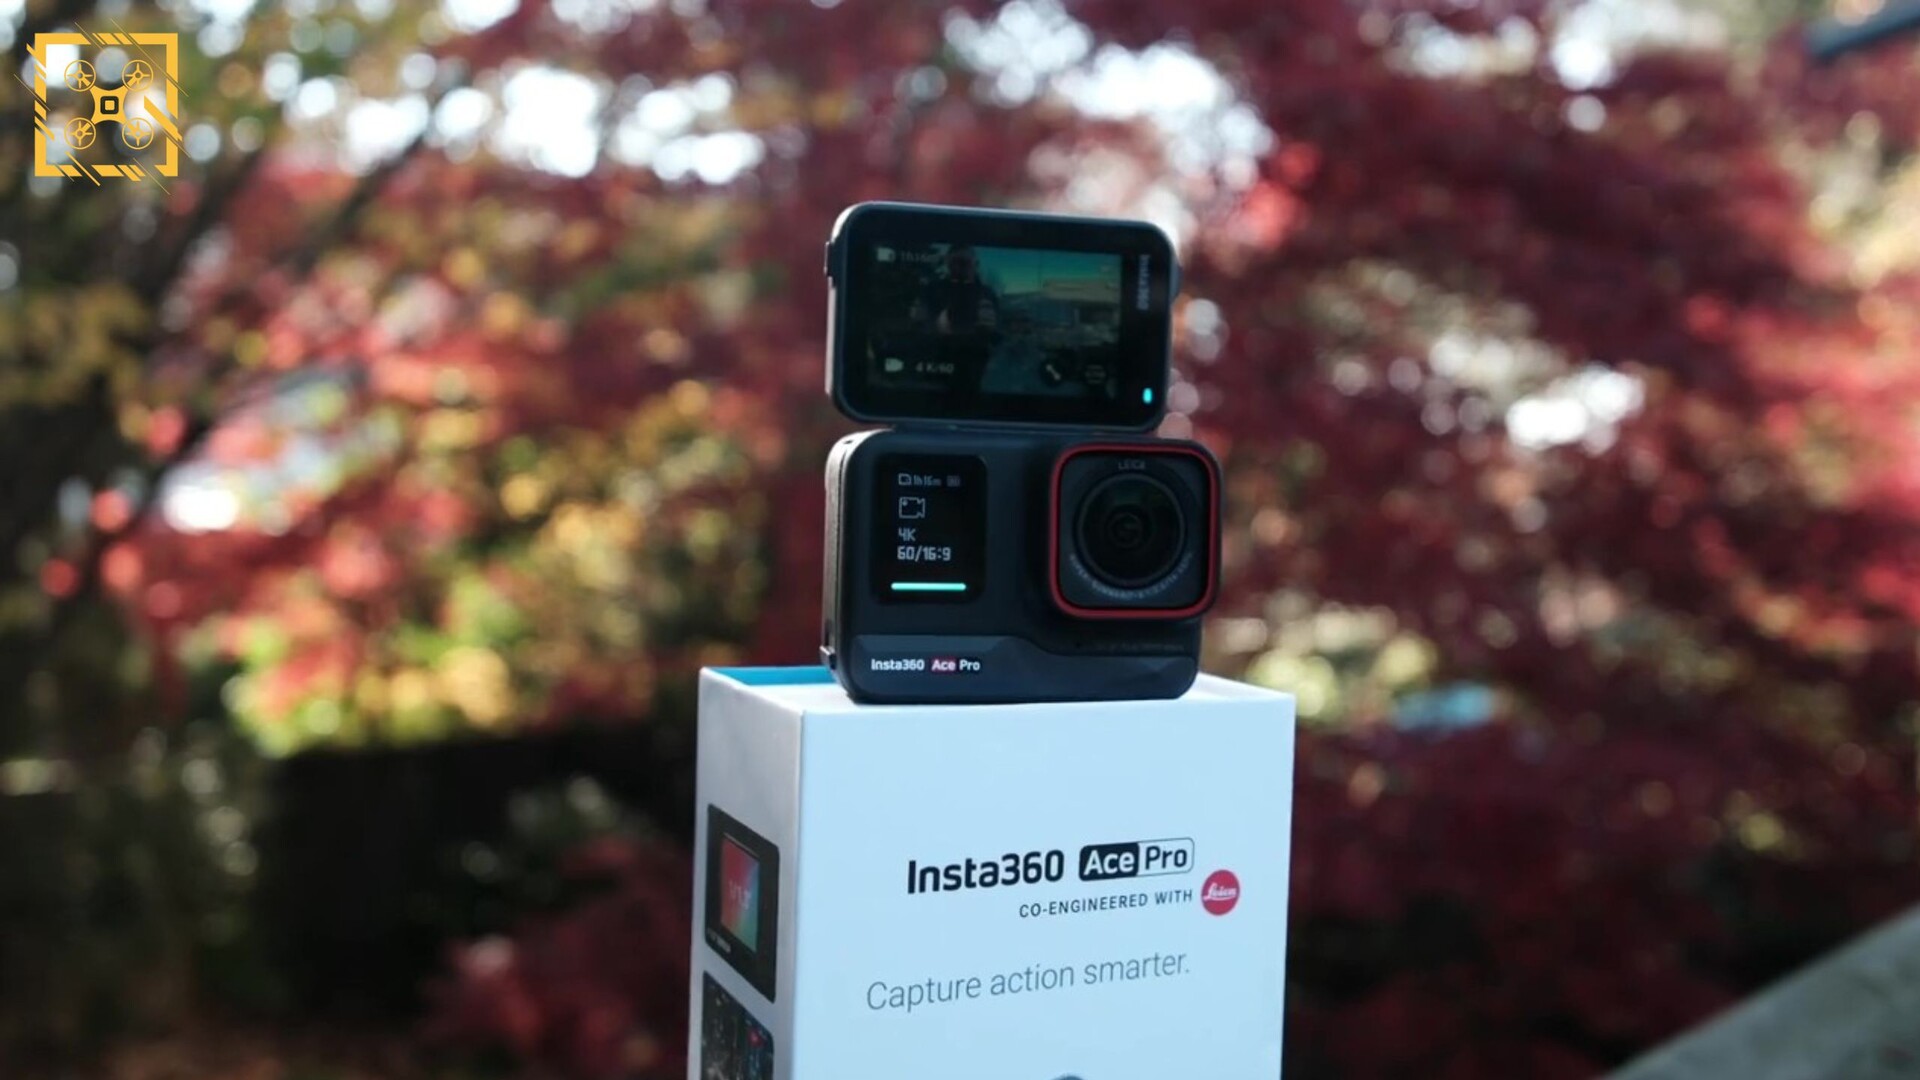 A Month with Insta360 Ace Pro - AI Magic. But Was It a Flop